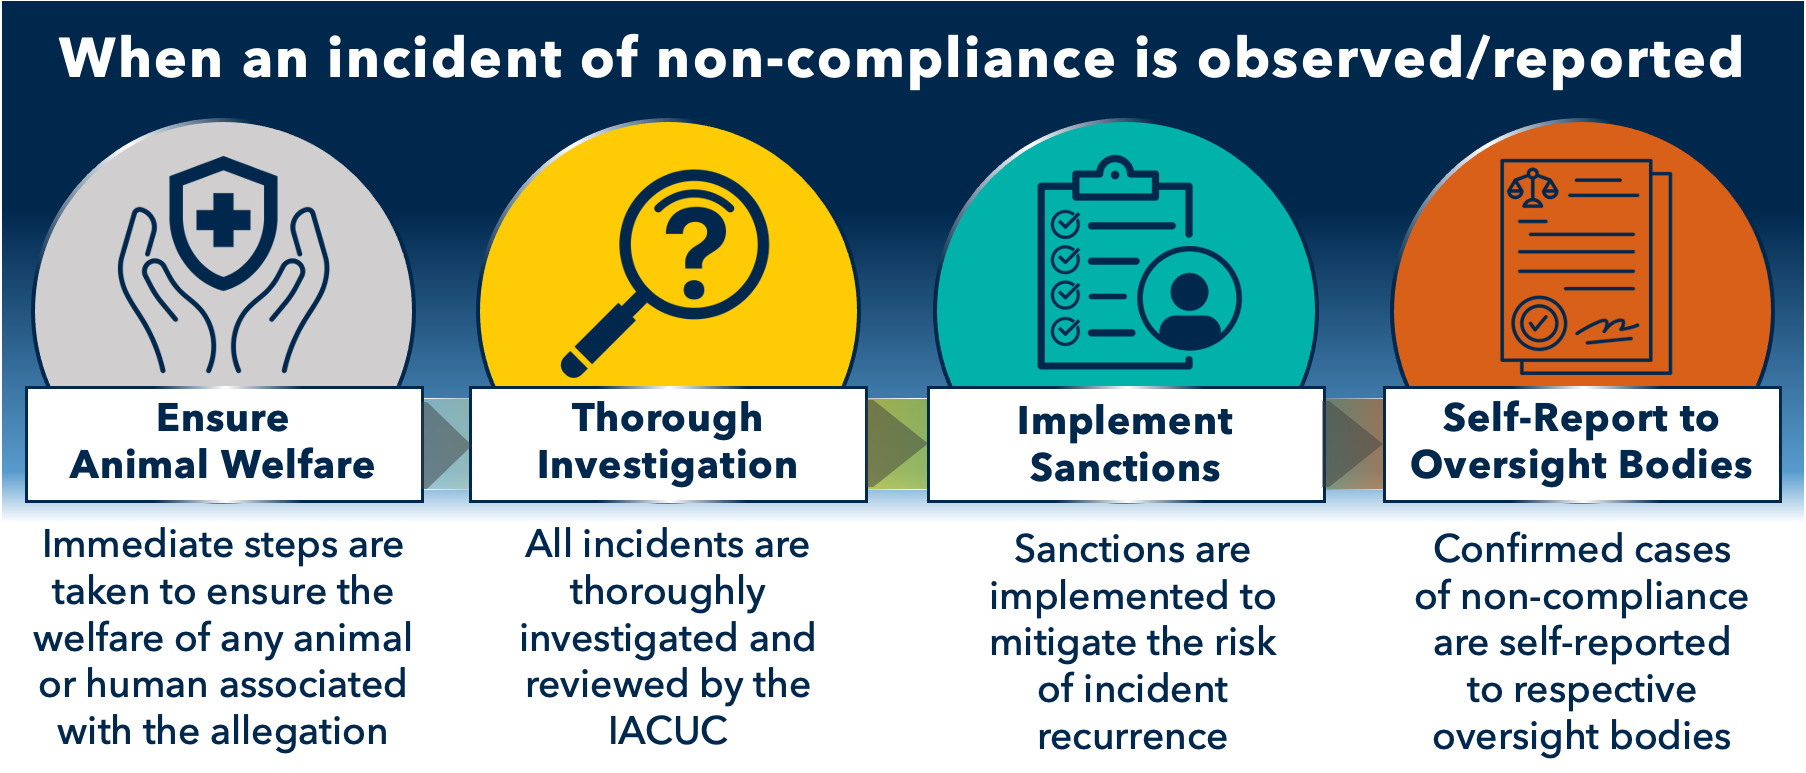 Infographic outlining how the U-M handles an incident of non-compliance